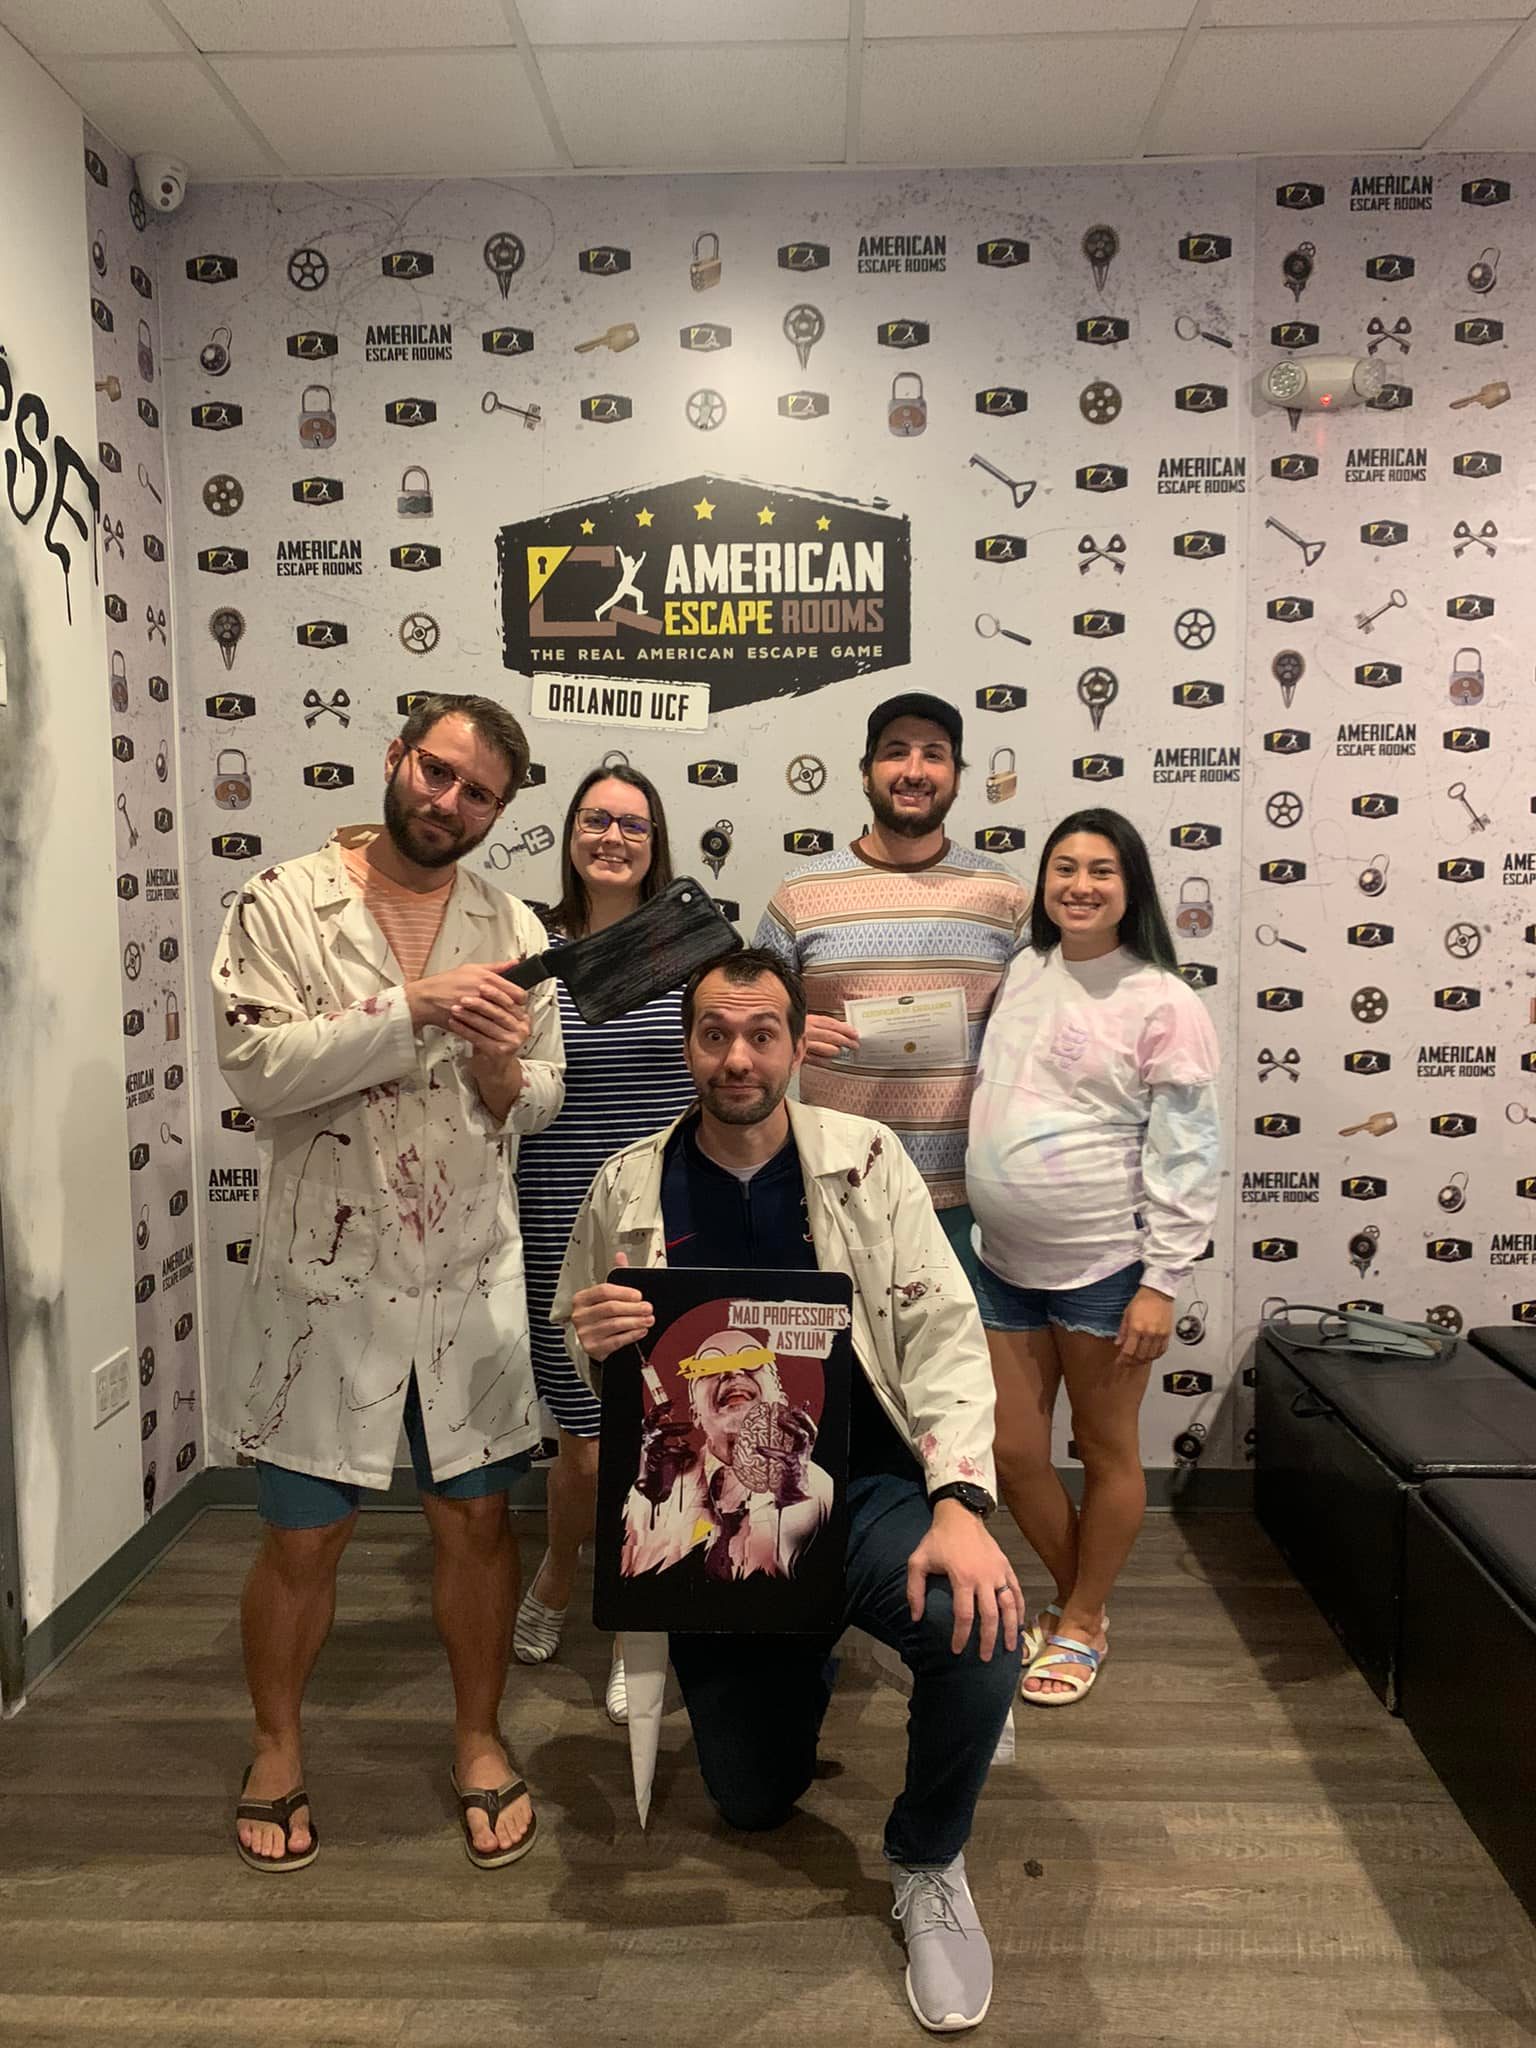 Team Empanada Armada played the Mad Professor's Asylum - Orlando and finished the game with 14 minutes 27 seconds left. Congratulations! Well done!